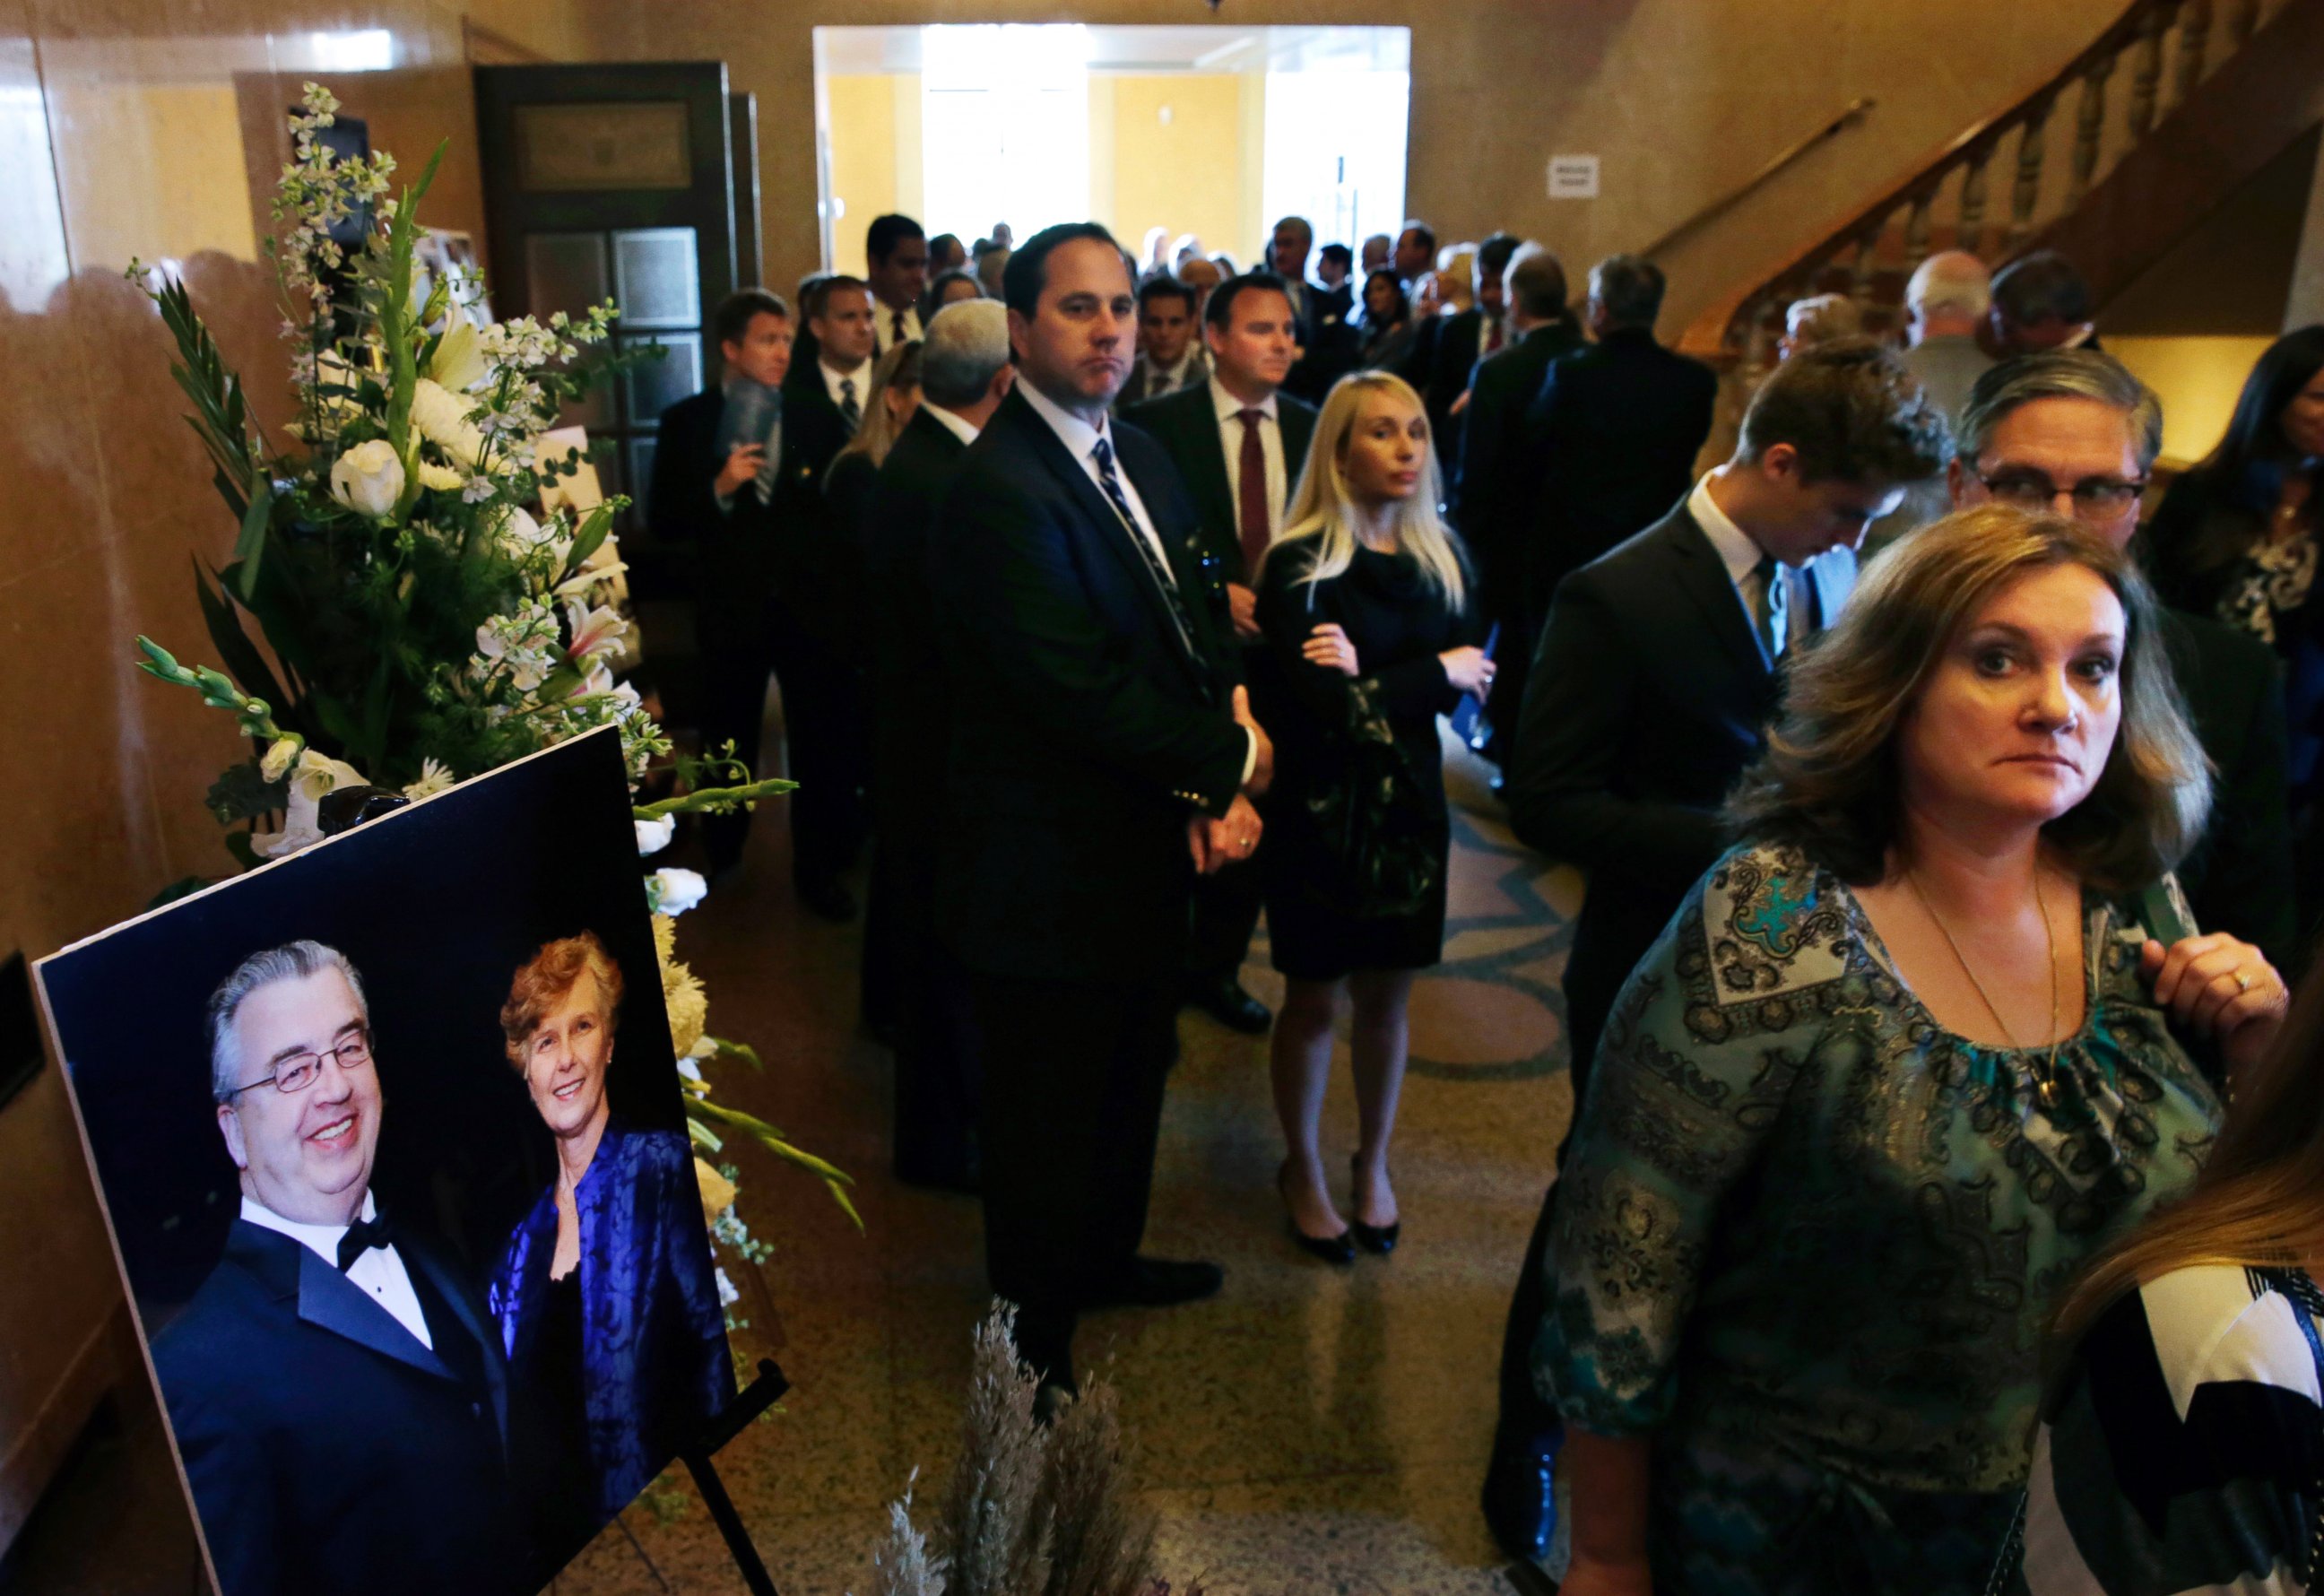 PHOTO: People file past a portrait of John and Joyce Sheridan, into a memorial service for the couple at the War Memorial, Oct. 7, 2014, in Trenton, N.J.